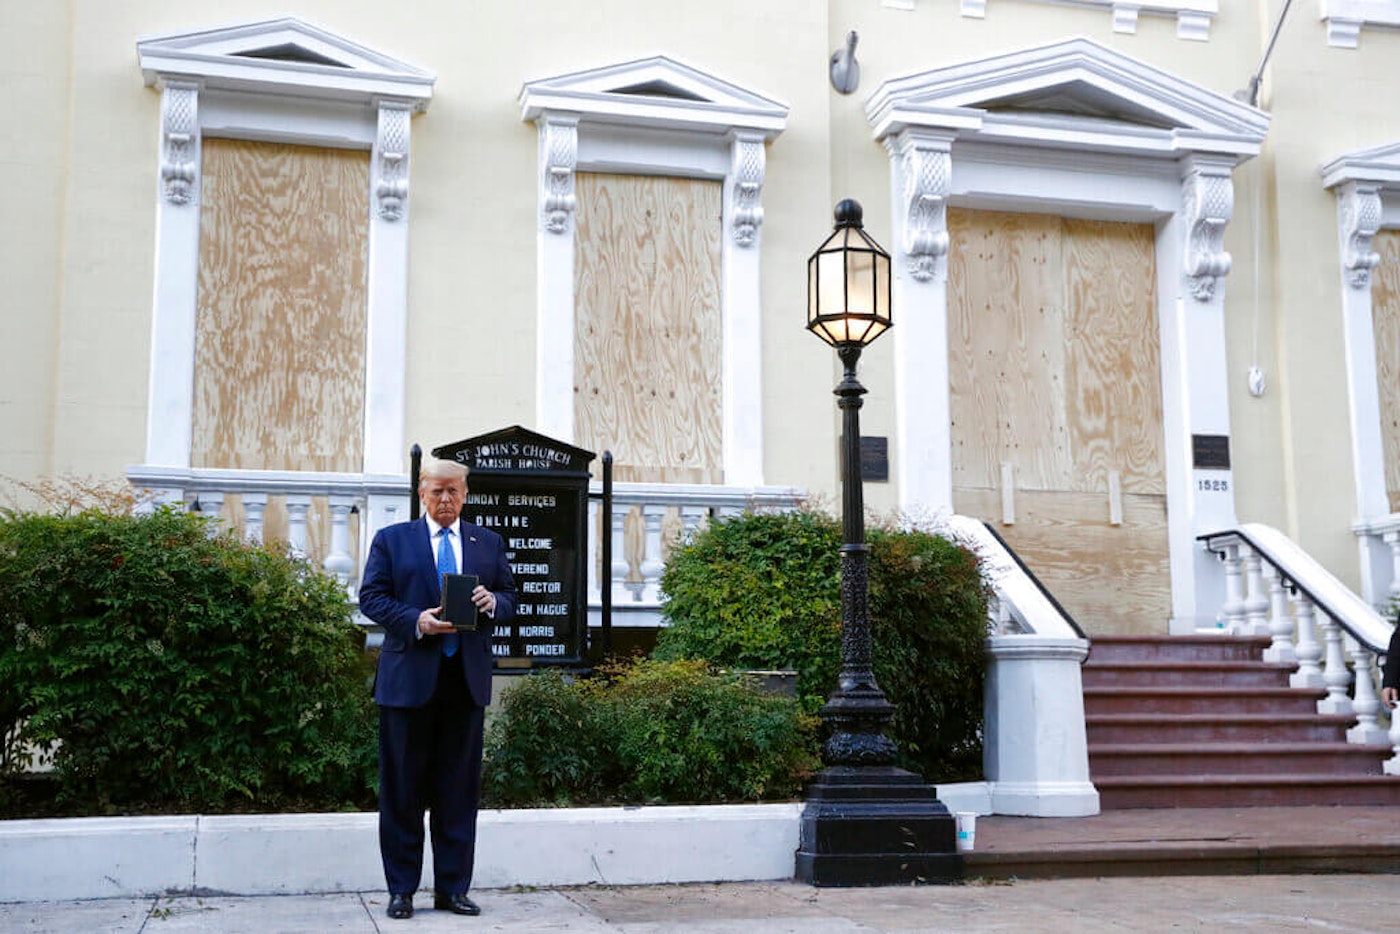 President Donald Trump holds a Bible after using tear gas to clear peaceful protestors from St. John's Church across from the White House on Monday, June 1, 2020, in Washington. (AP Photo/Patrick Semansky)